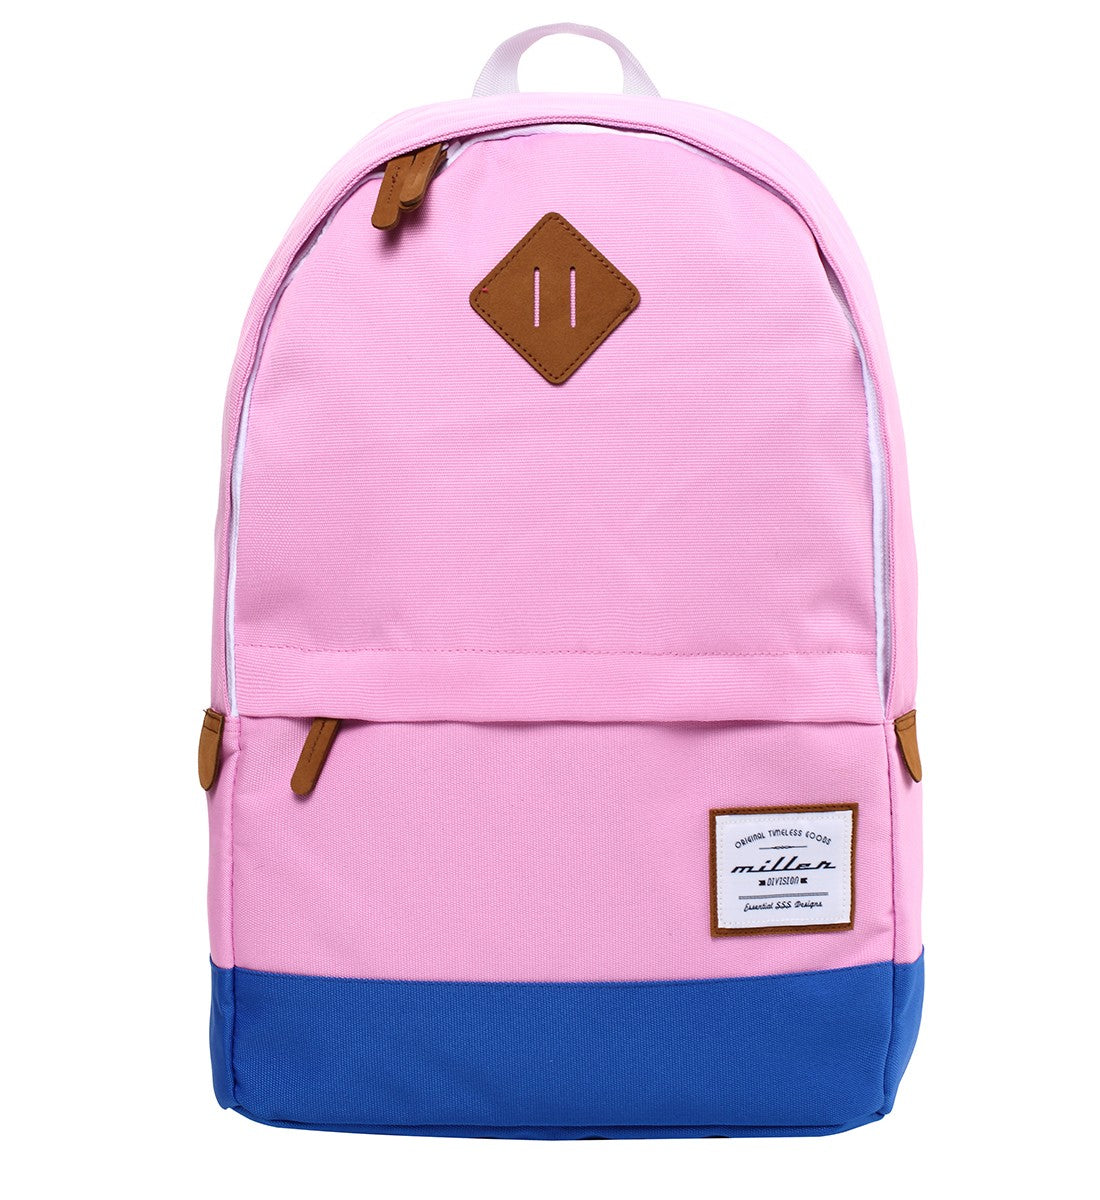 Sac à dos MILLER backpack Classic pink